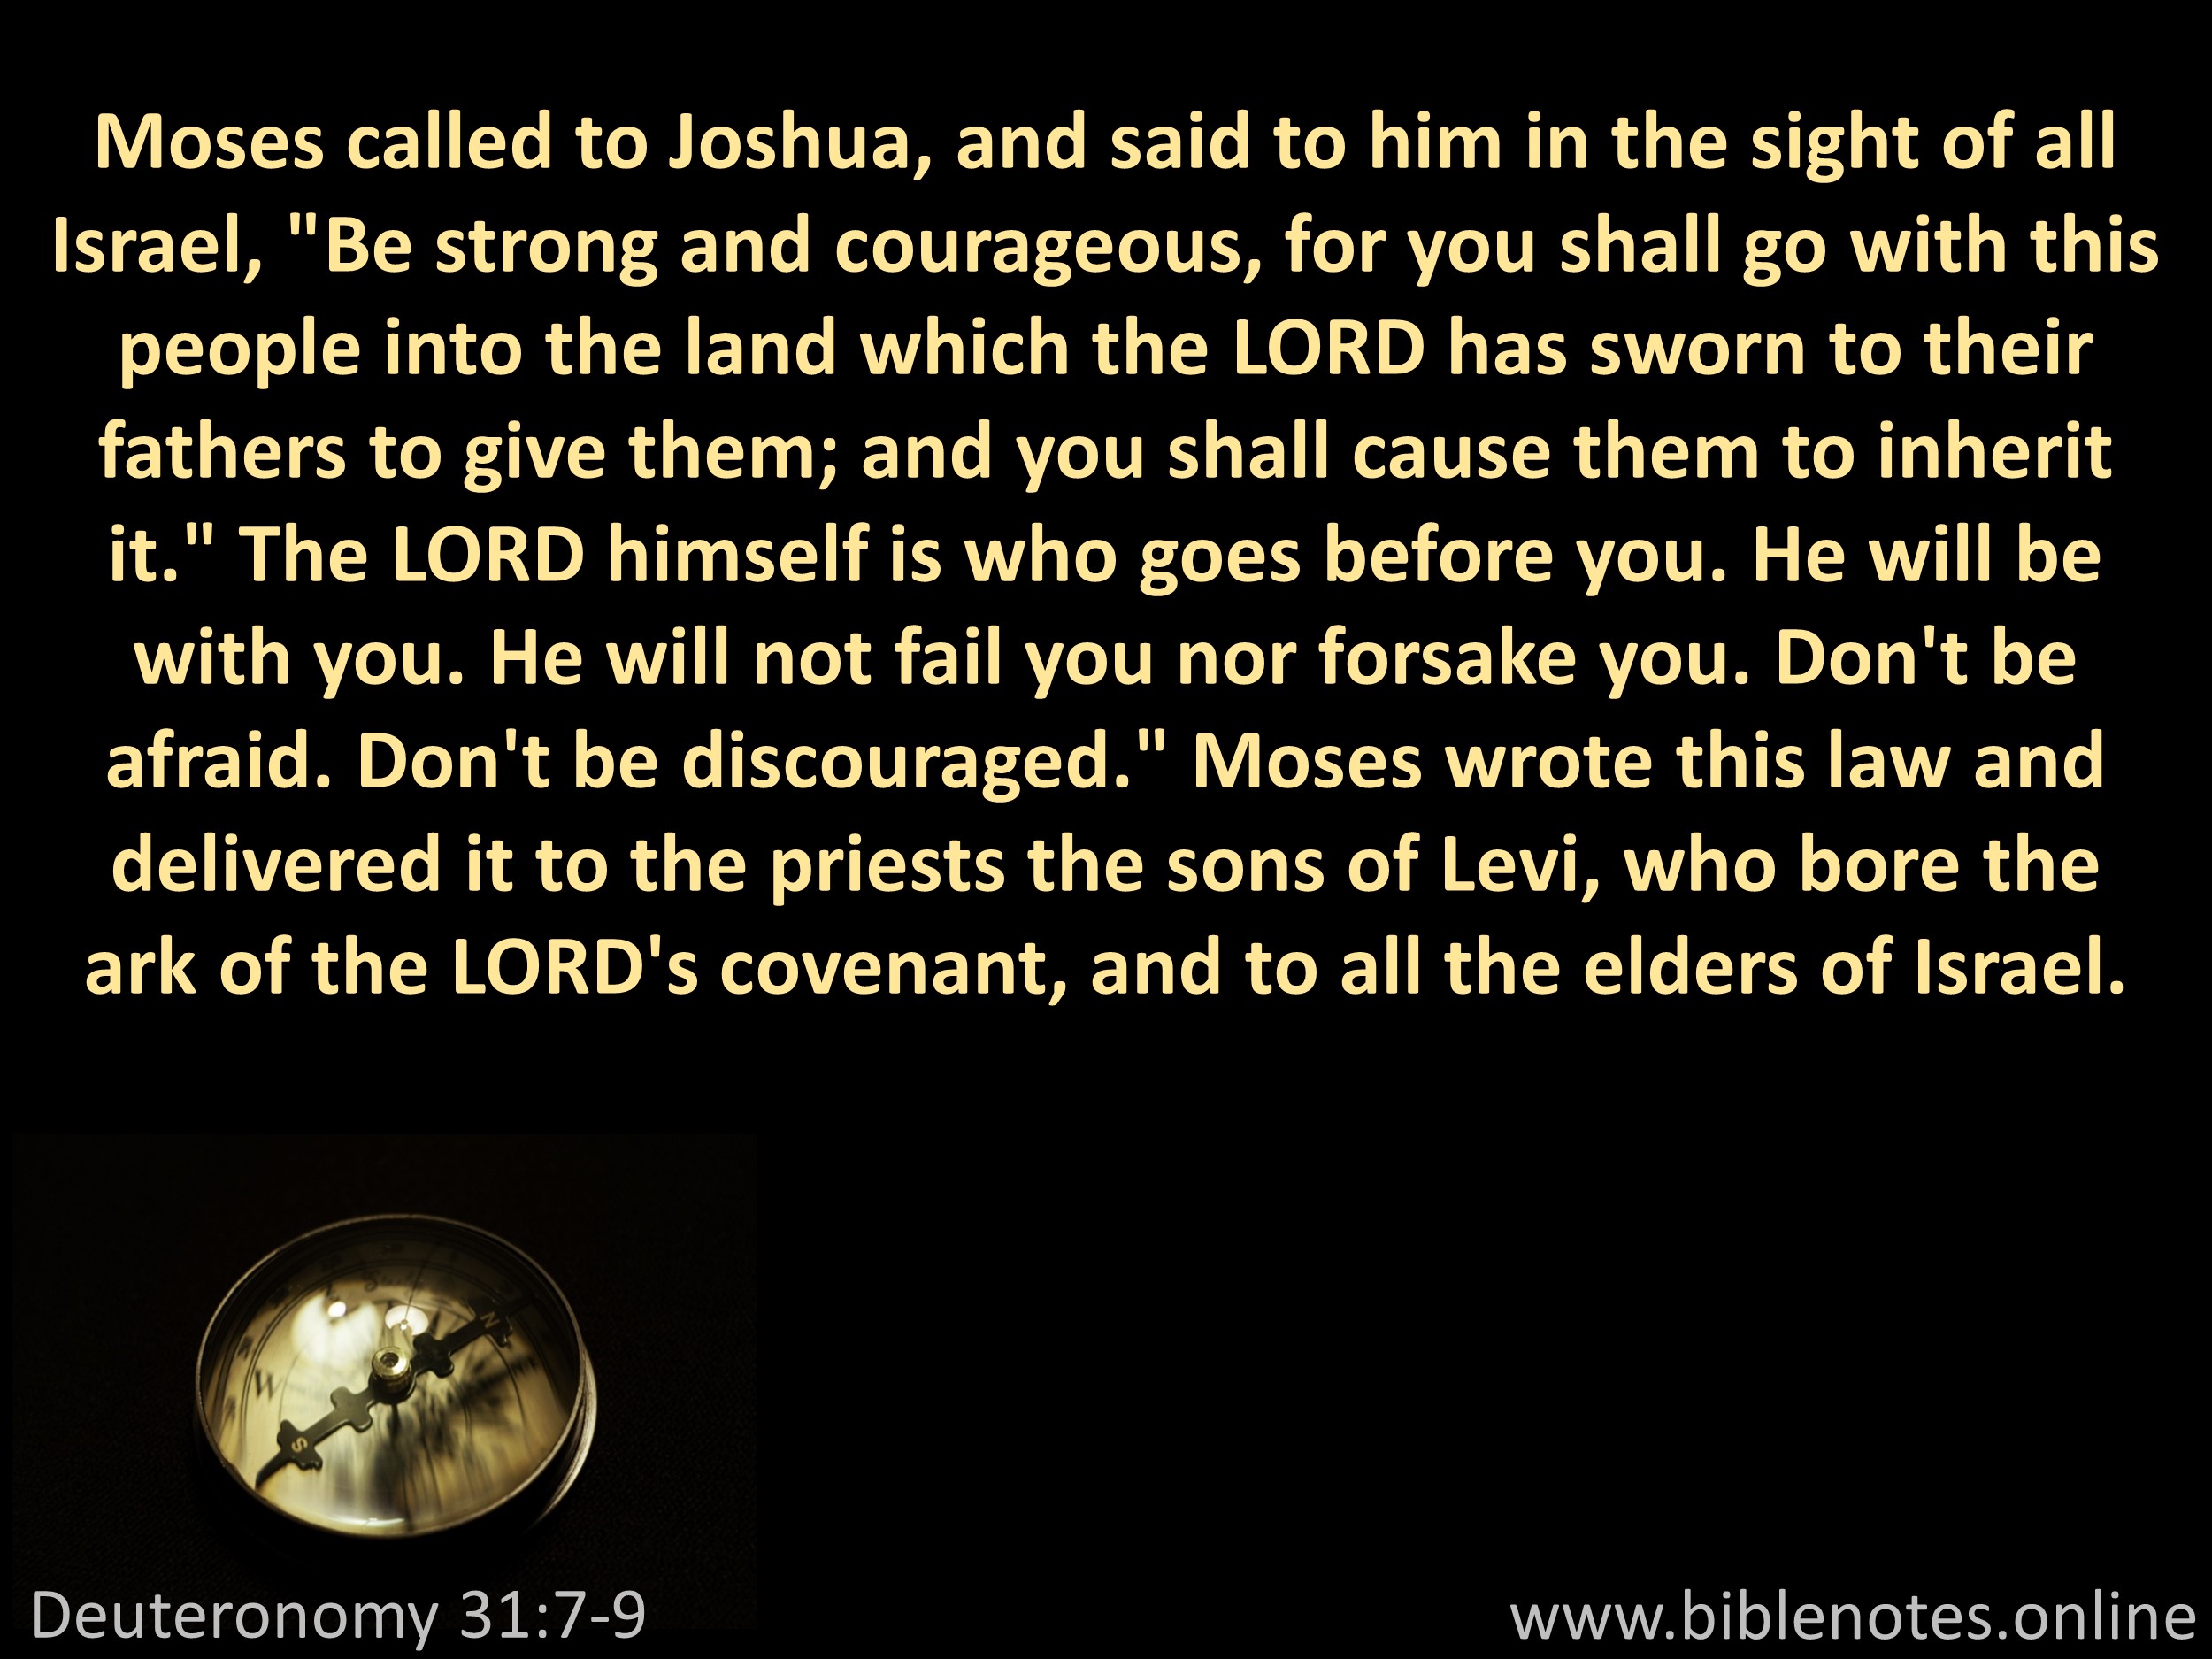 Bible Verse from Deuteronomy Chapter 31